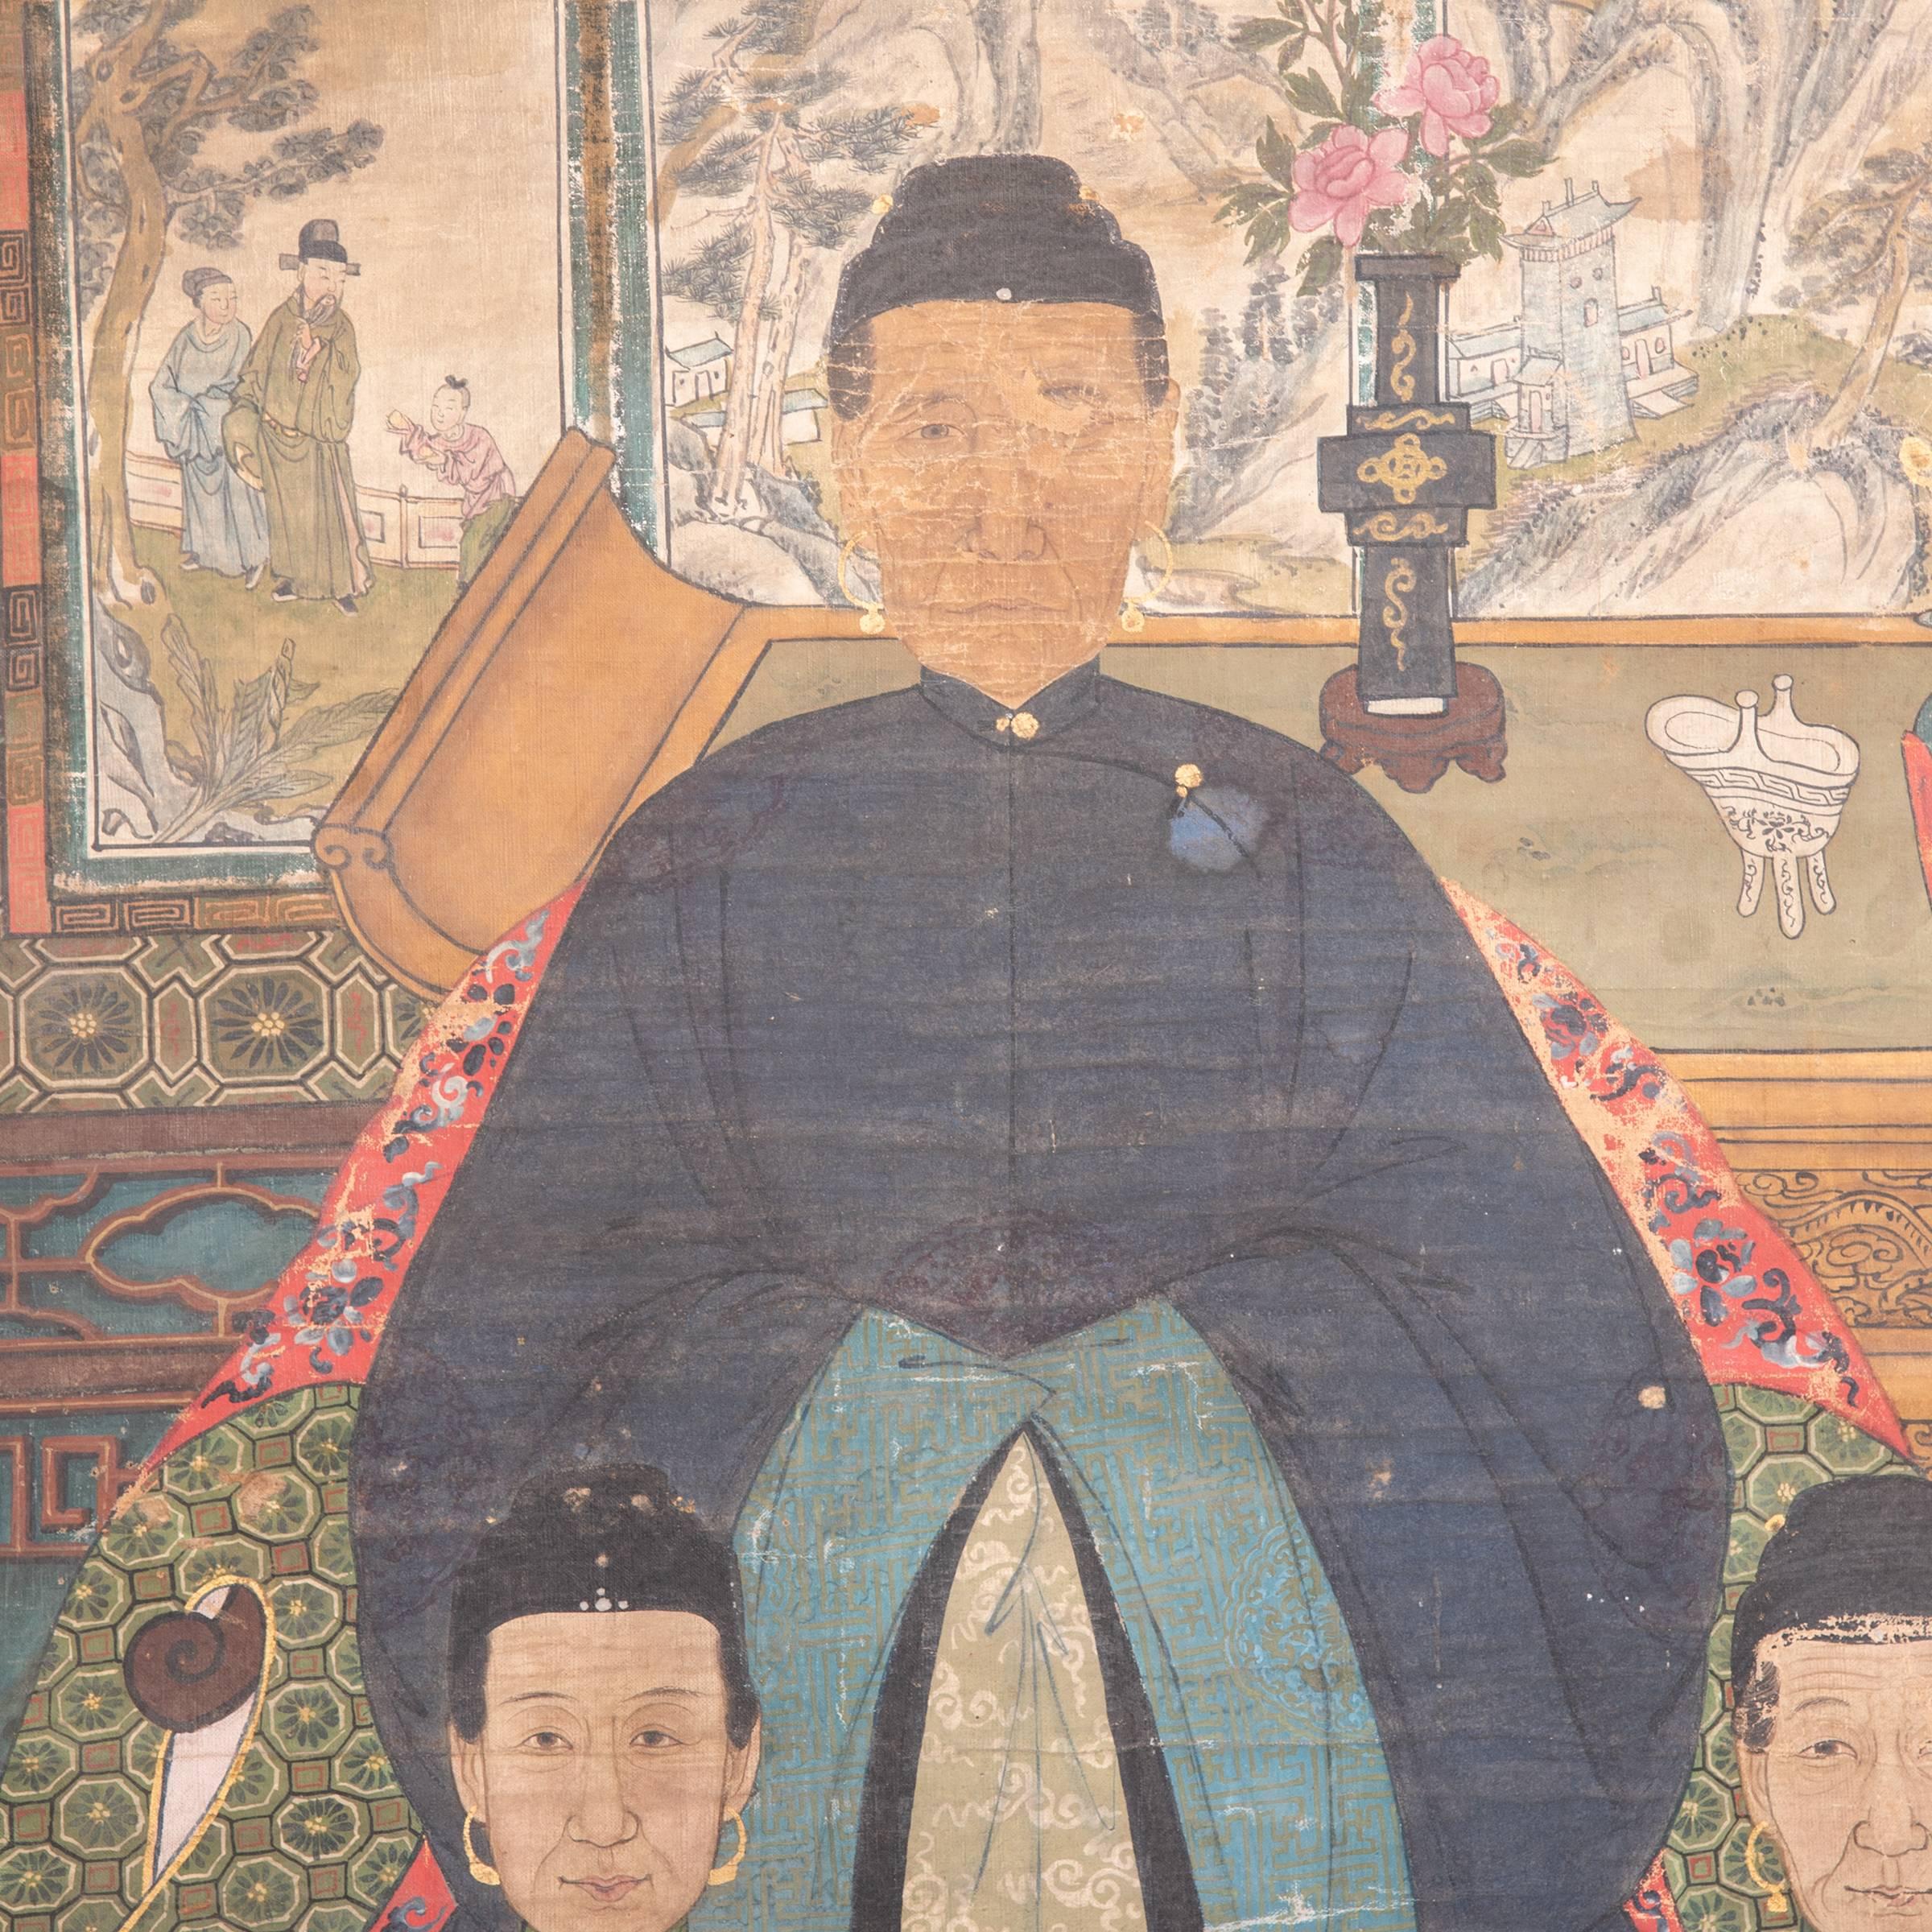 This richly colored and exquisitely detailed composition painted, circa 1850 during the Qing dynasty points to the central role ancestor worship played in Chinese culture. The painting depicts several generations, dressed in intricately detailed and